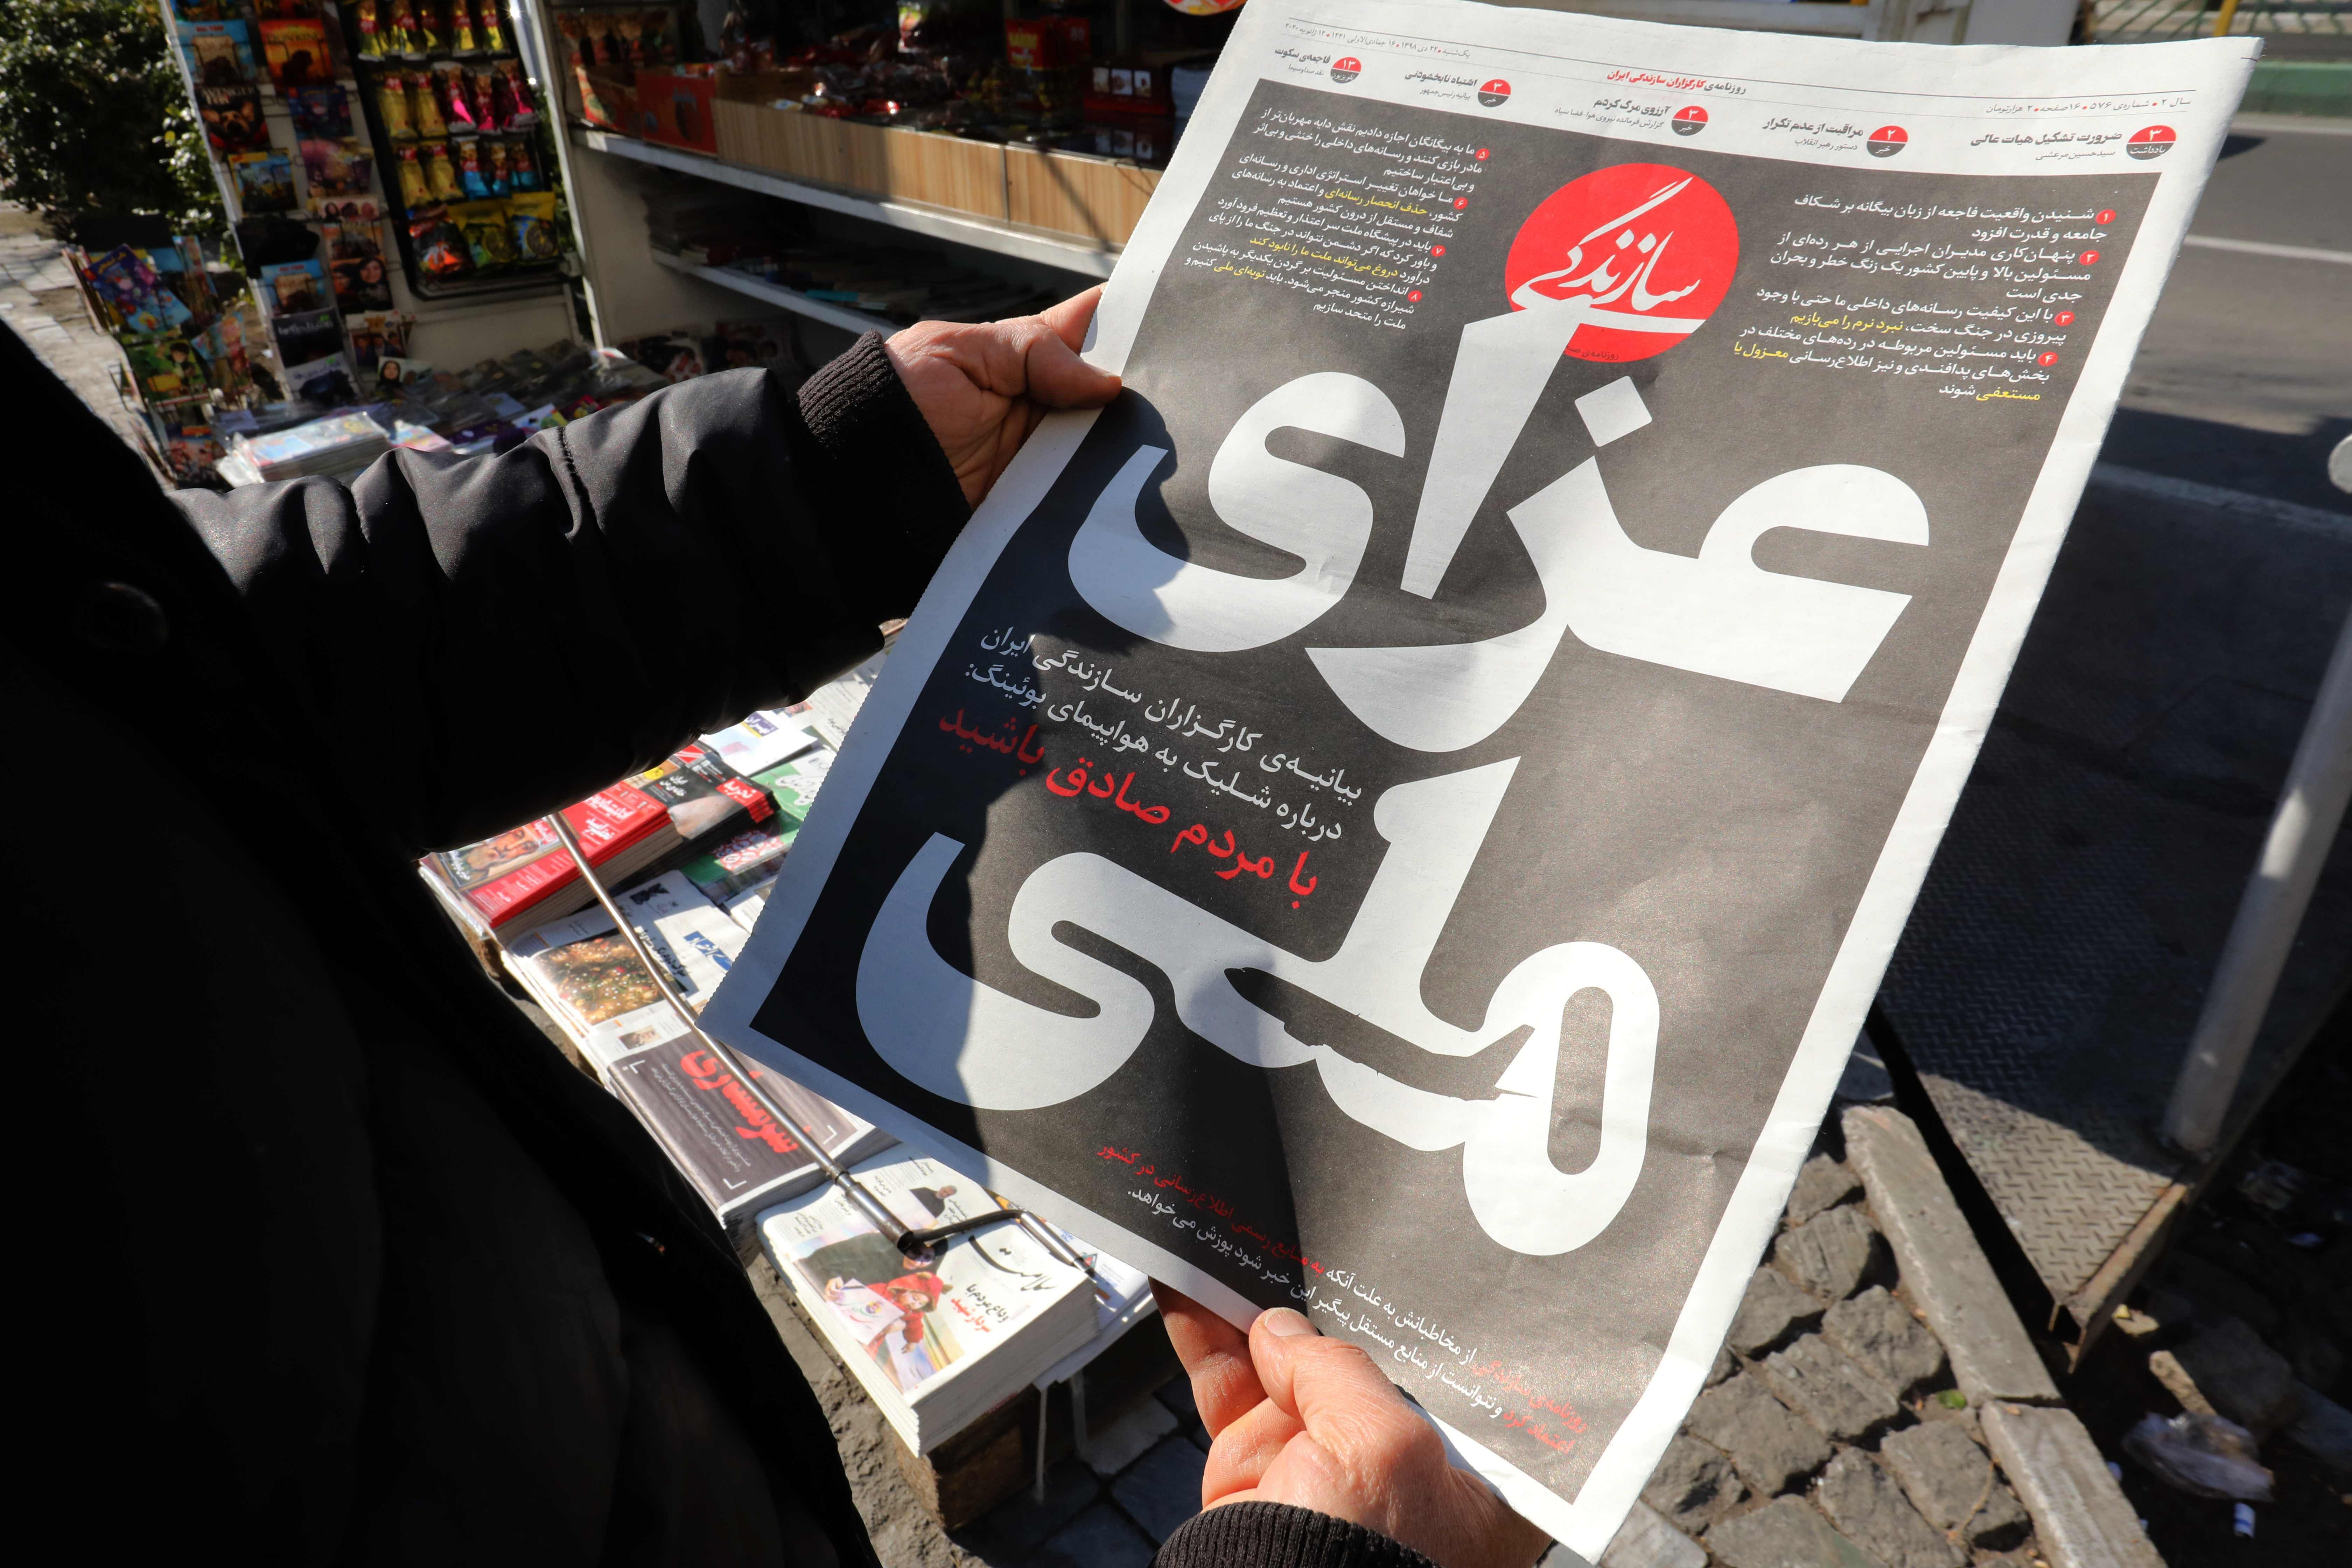 An Iranian man checks a local newspaper headline that reads "National Mourning" refering to the downed Ukranian jetliner outside the capital Tehran last week, in front of a news stand in the Islamic republic's capital Tehran. (AFP Photo)